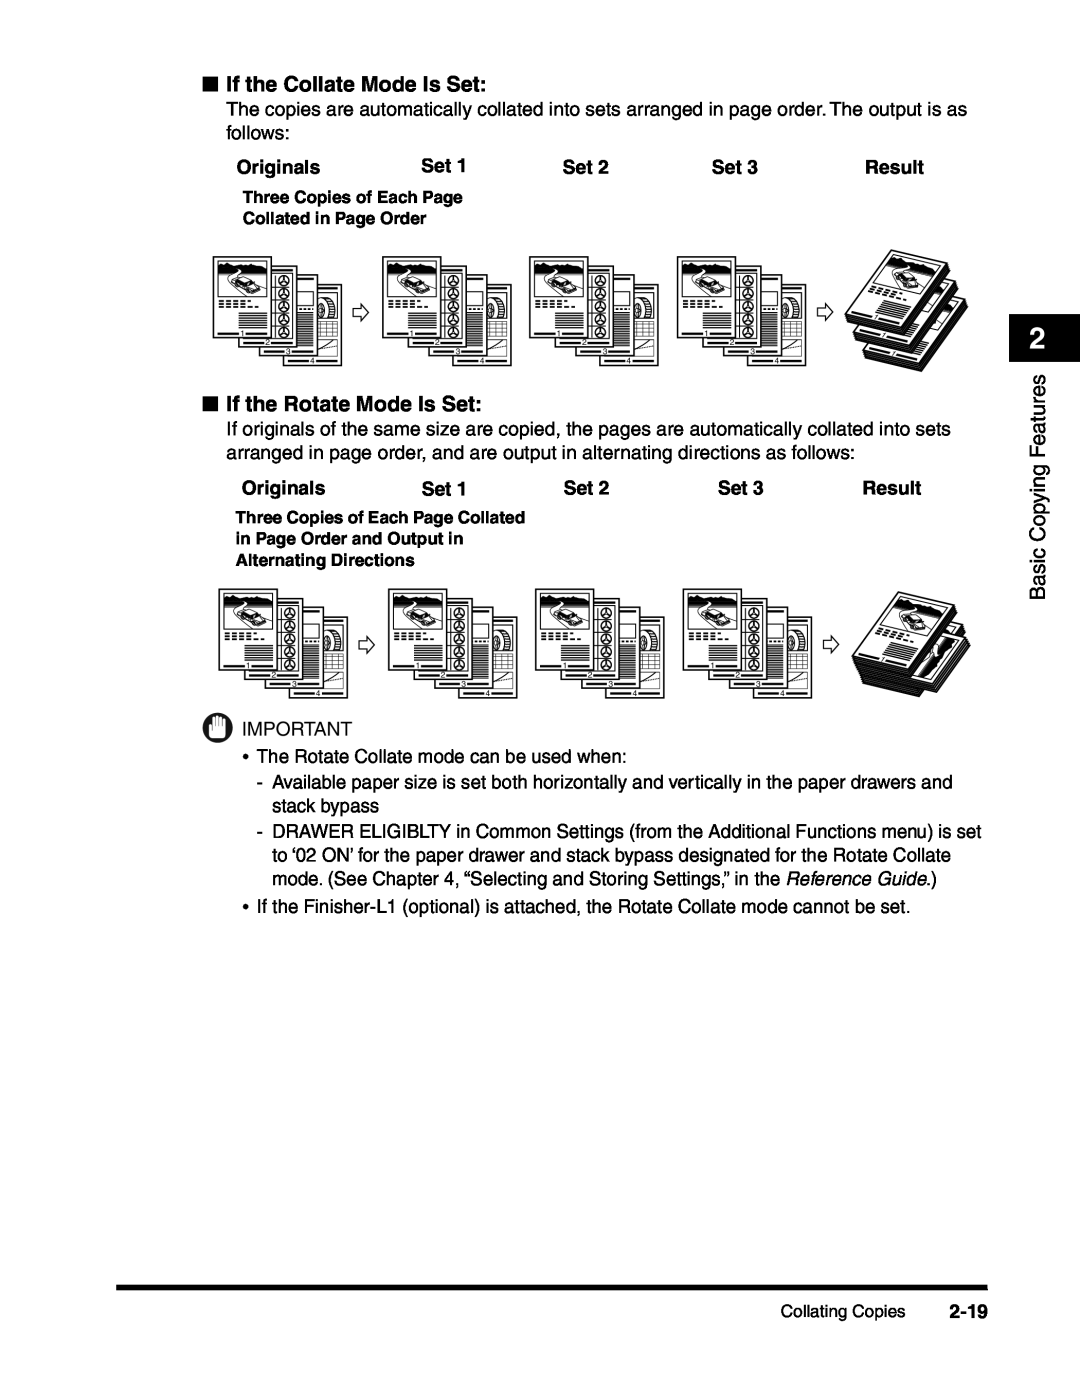 Canon 2010F manual If the Collate Mode Is Set, If the Rotate Mode Is Set, Originals, Result, 2-19, Basic Copying Features 